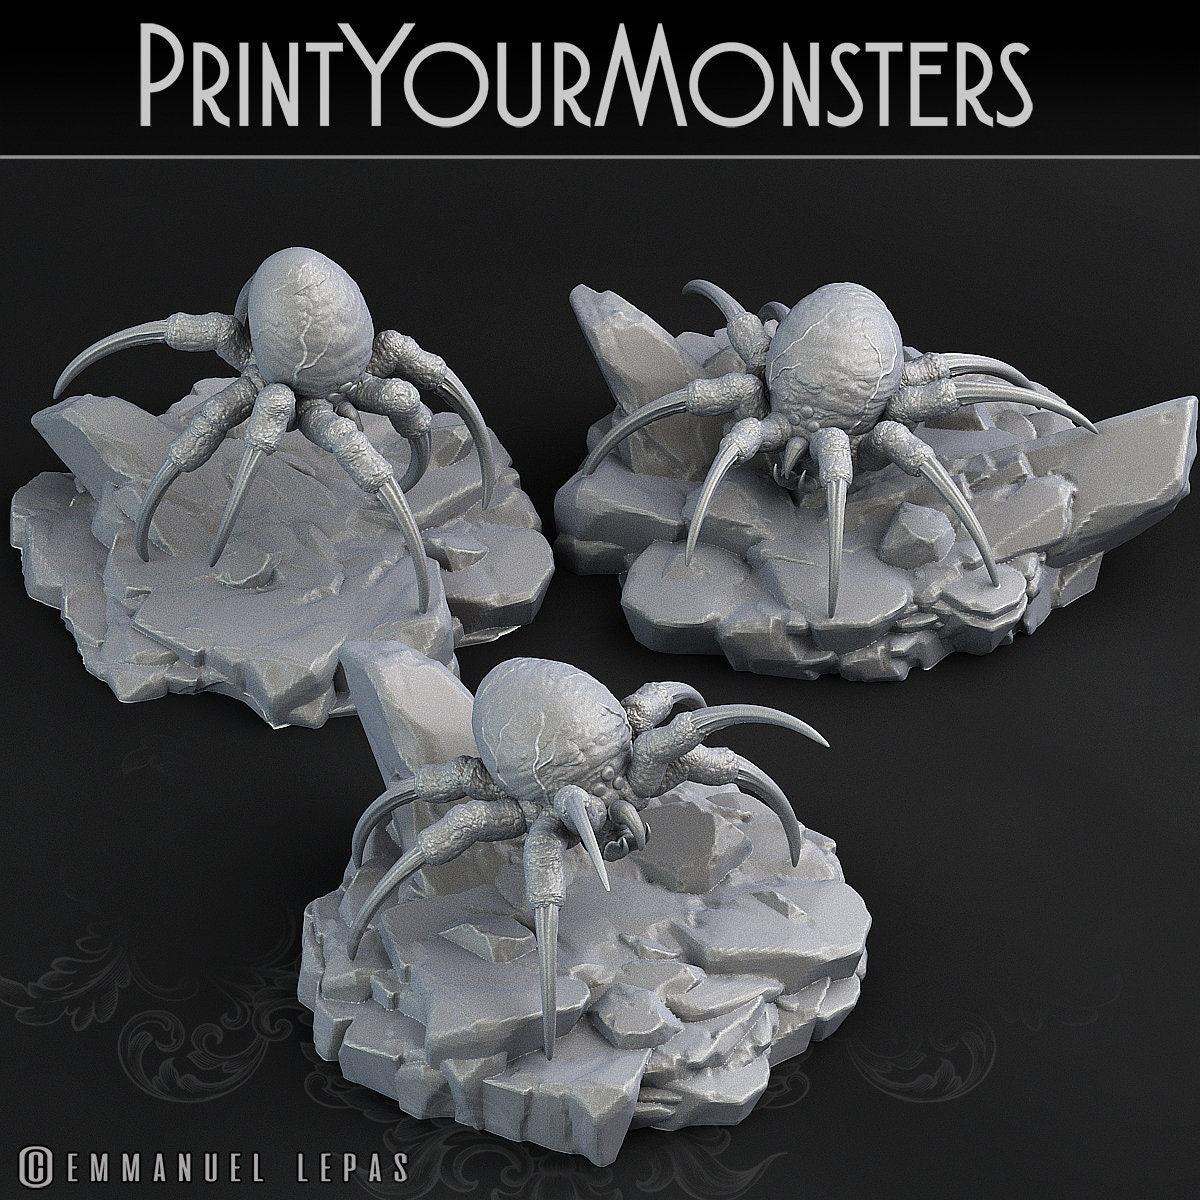 Snowdevil Spider Miniature Juvenile faerun monster | Print Your Monsters | Tabletop gaming | DnD Miniature Dungeons and Dragons DnD 5e - Plague Miniatures shop for DnD Miniatures